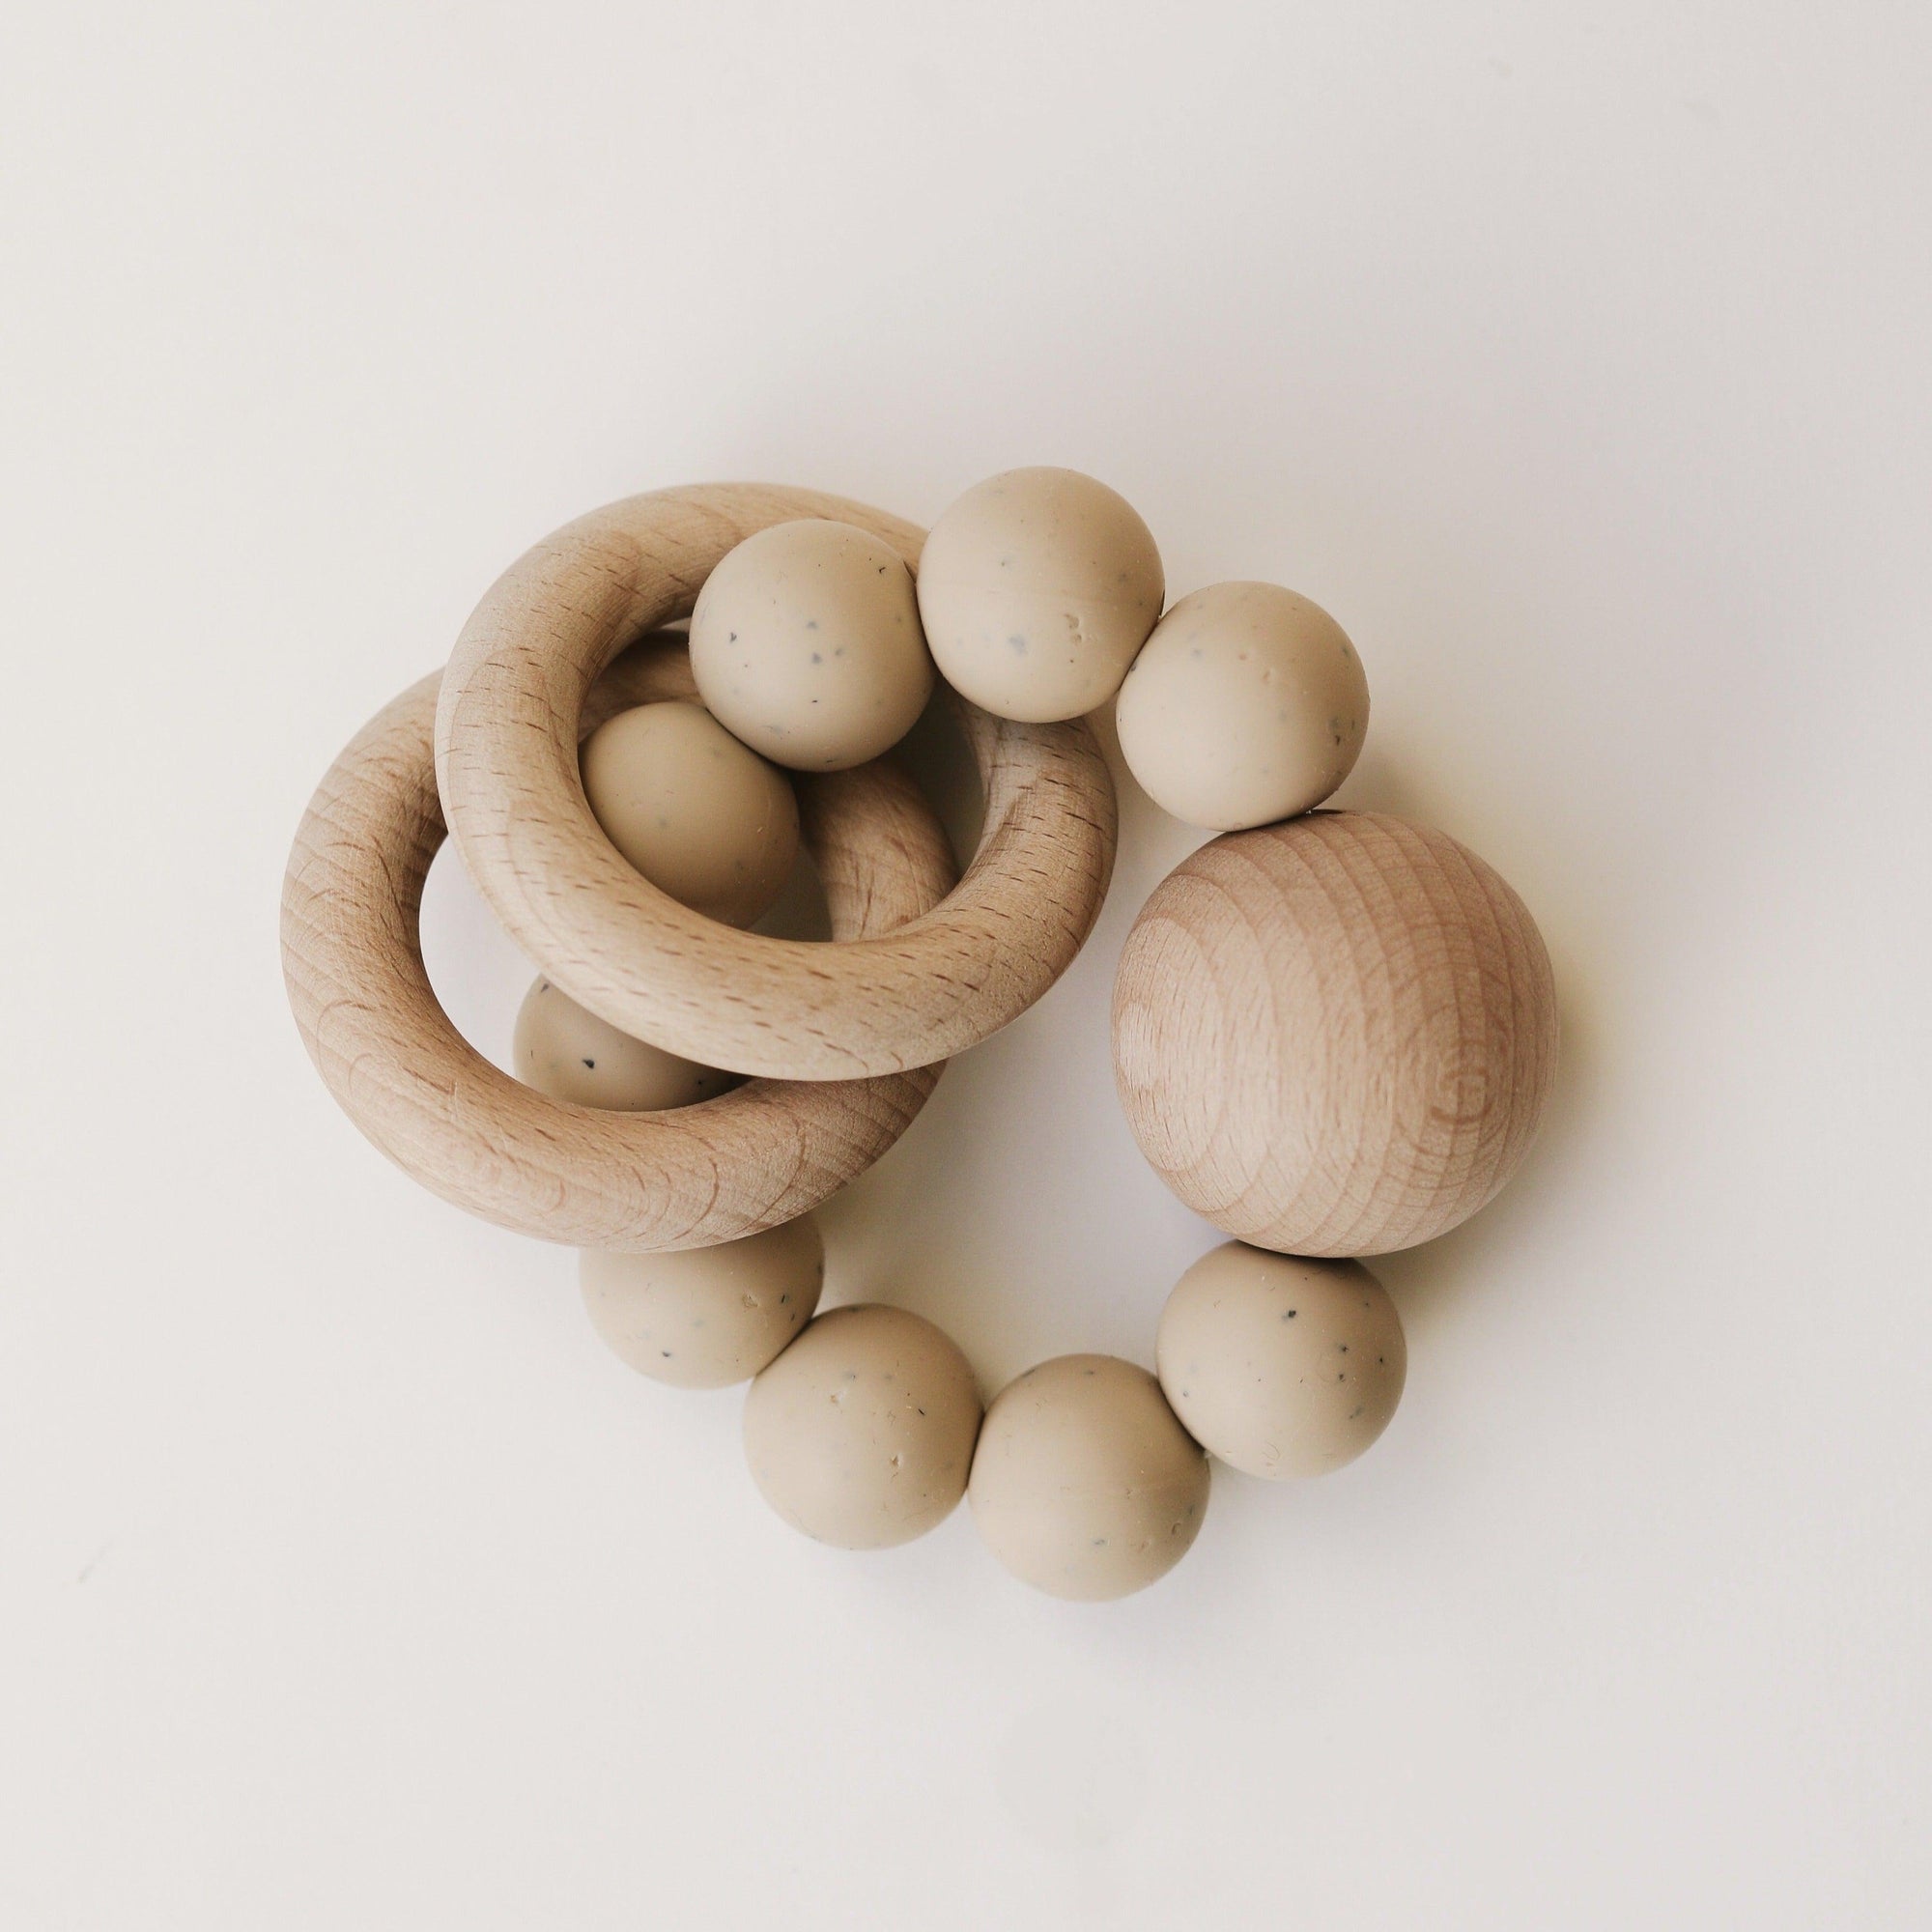 A set of Dove & Dovelet Wooden Silicone Teethers on a white surface.